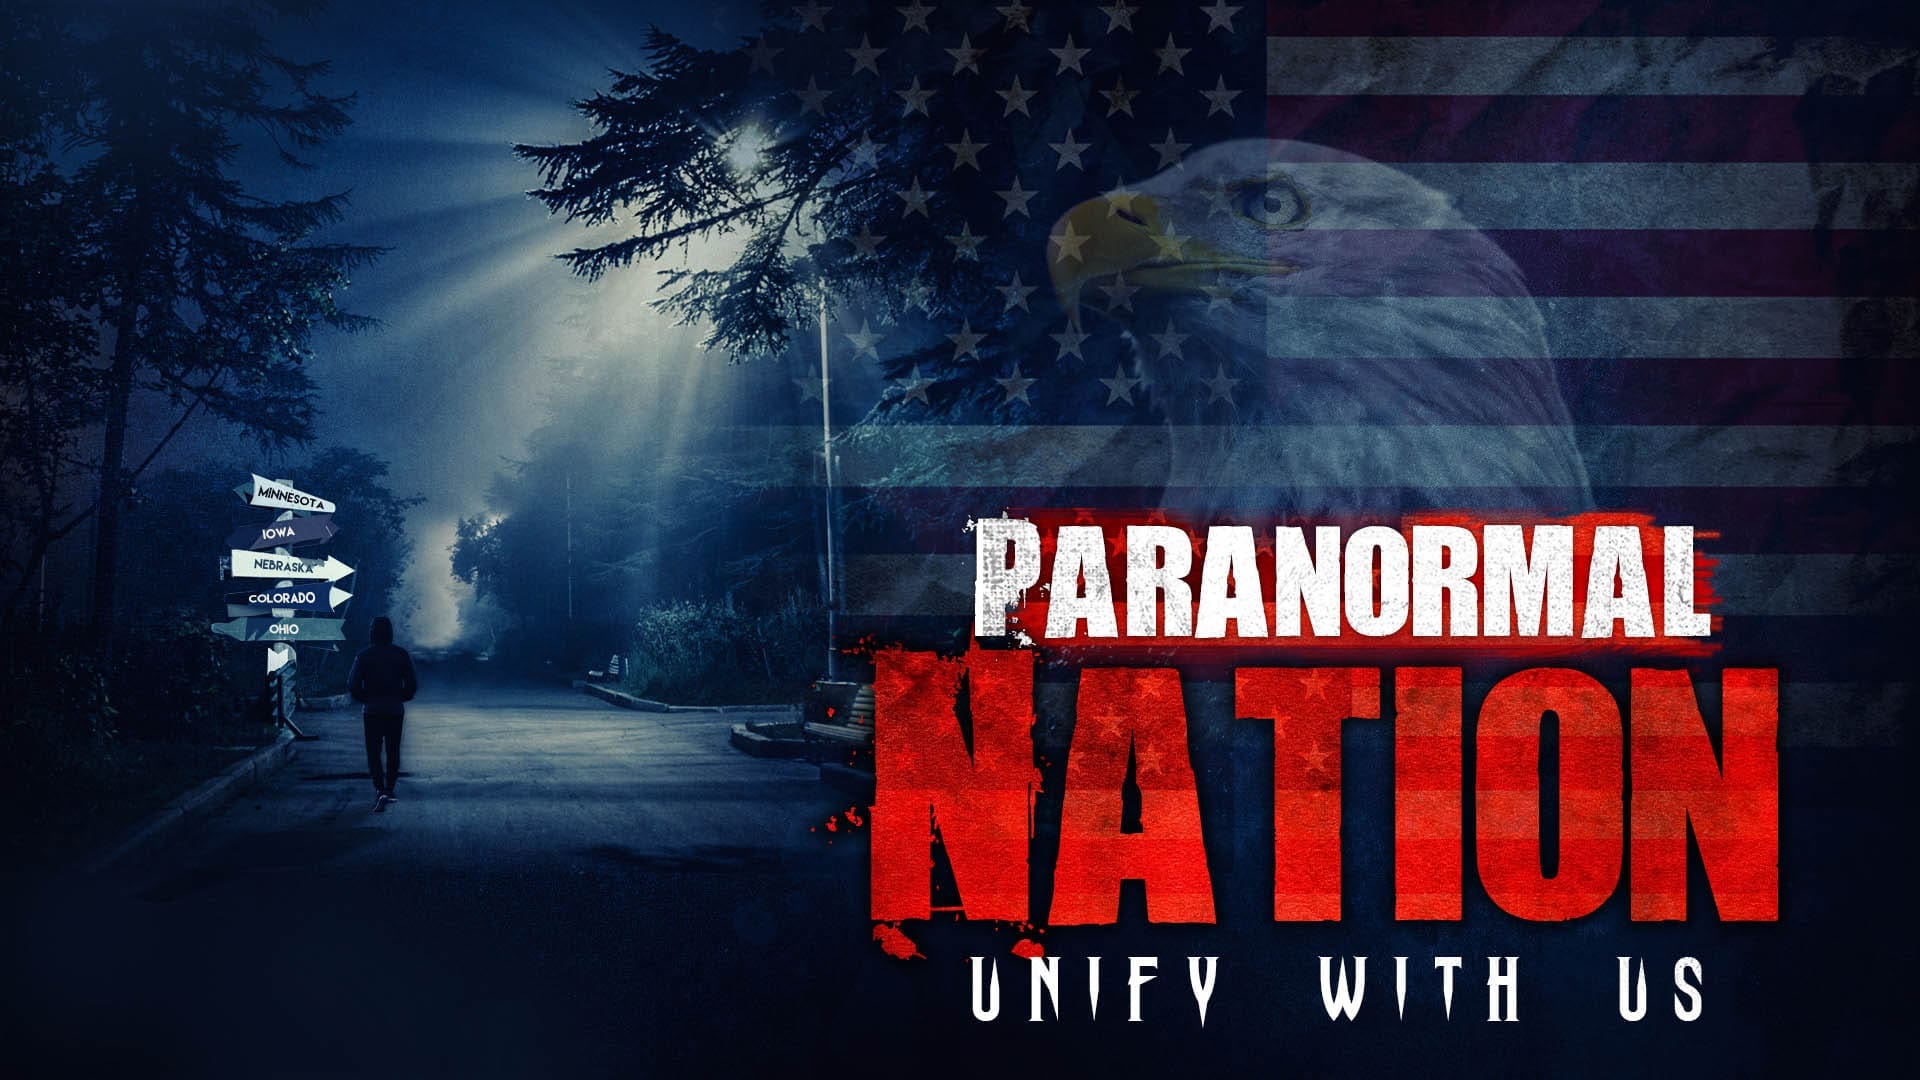 Paranormal Nation - Unify With Us